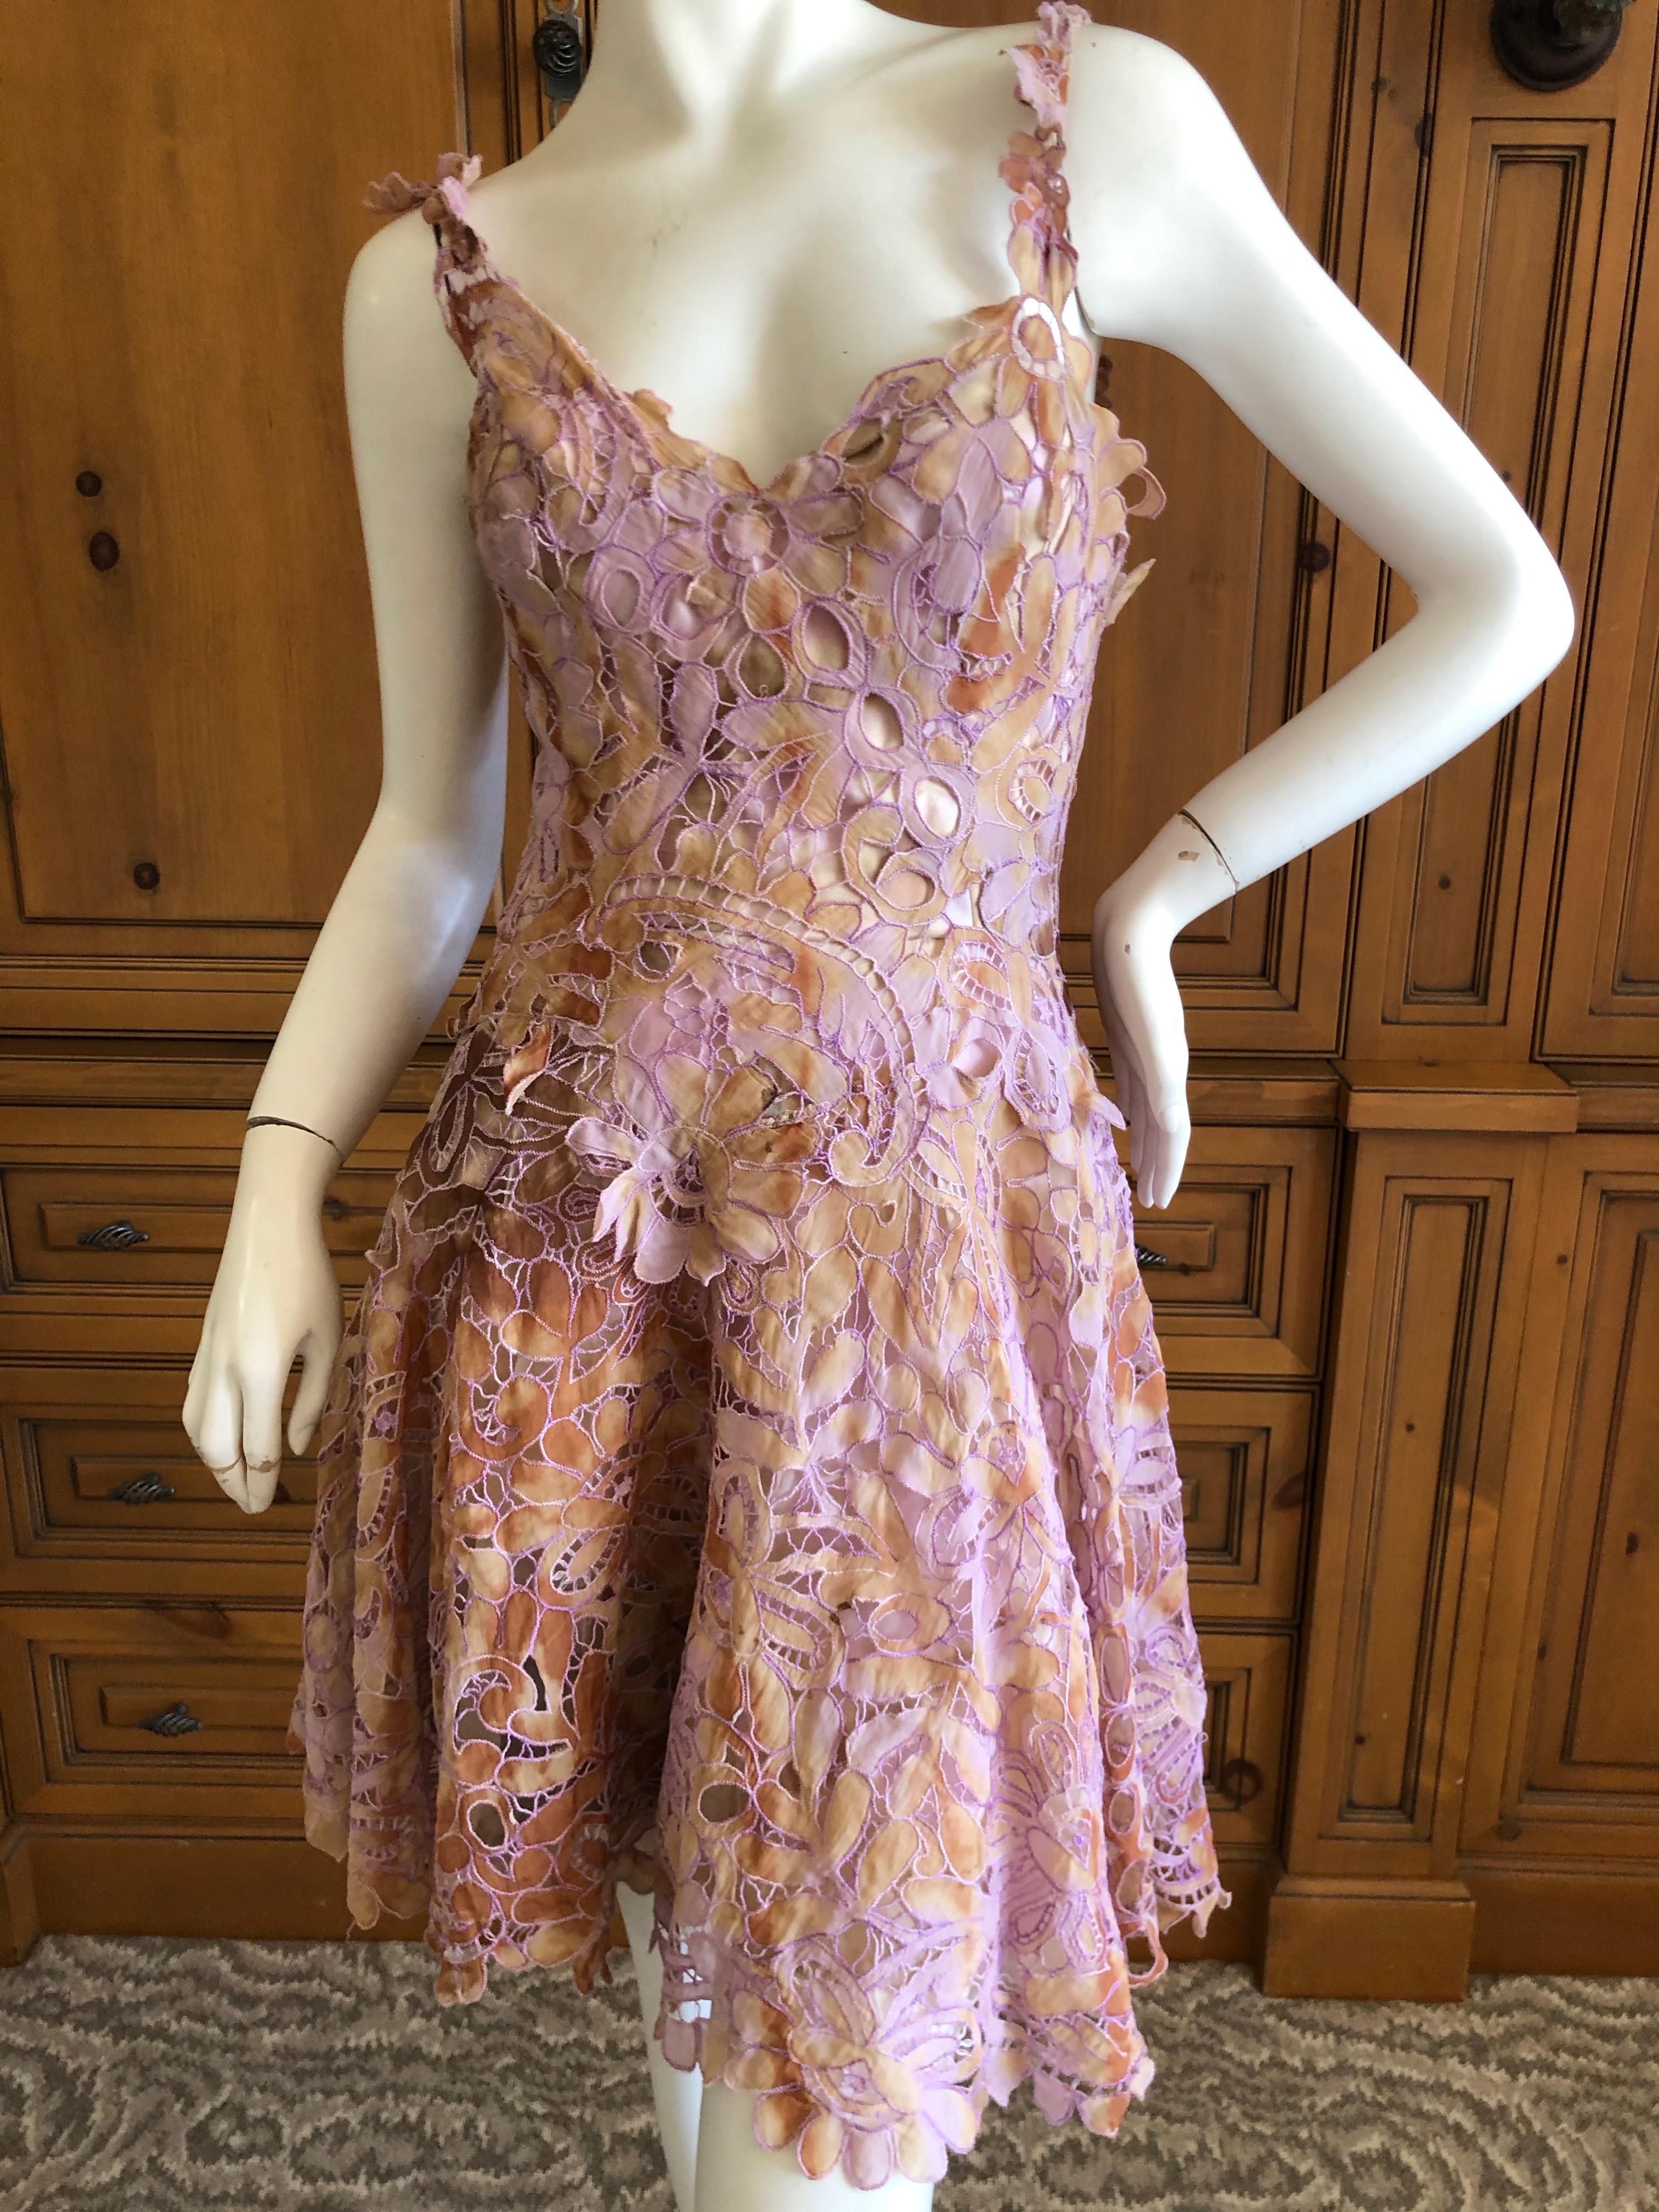 Ermanno Scervino Tie Dye Lace Applique Cocktail Dress with Inner Corset In Good Condition For Sale In Cloverdale, CA